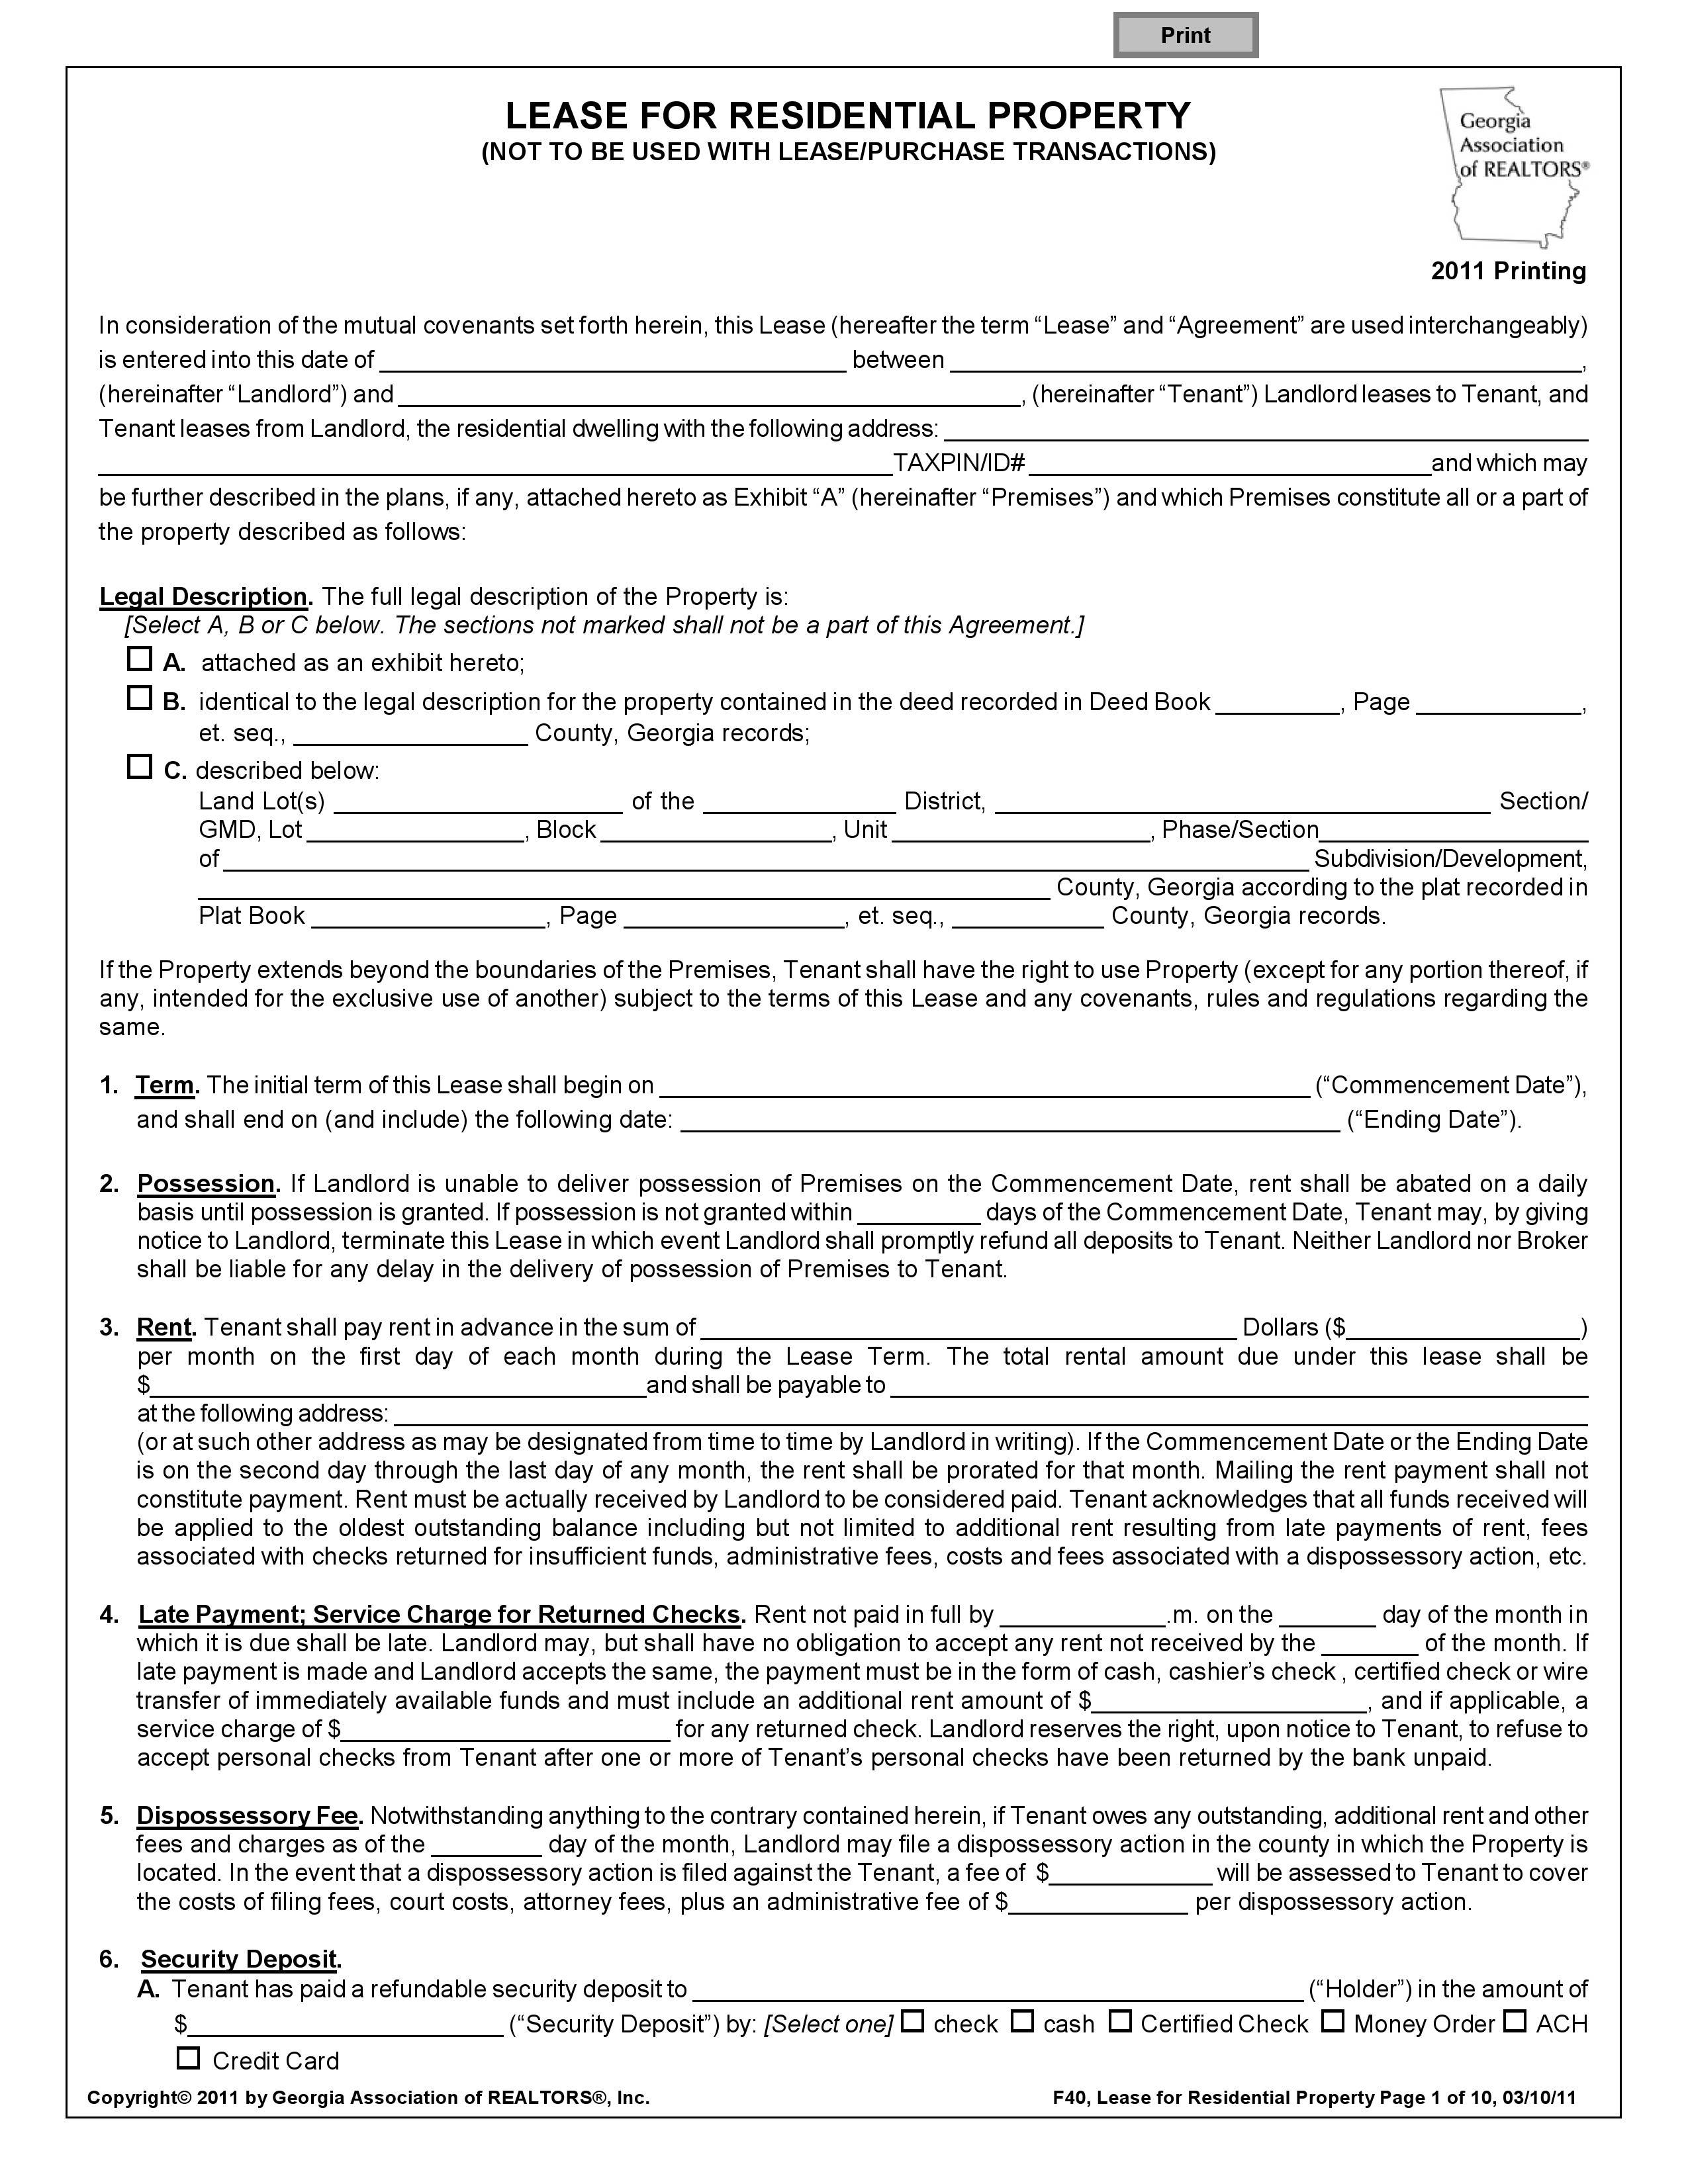 Residential Lease Agreement Template Free Download Blank Rental - Free Printable Residential Rental Agreement Forms